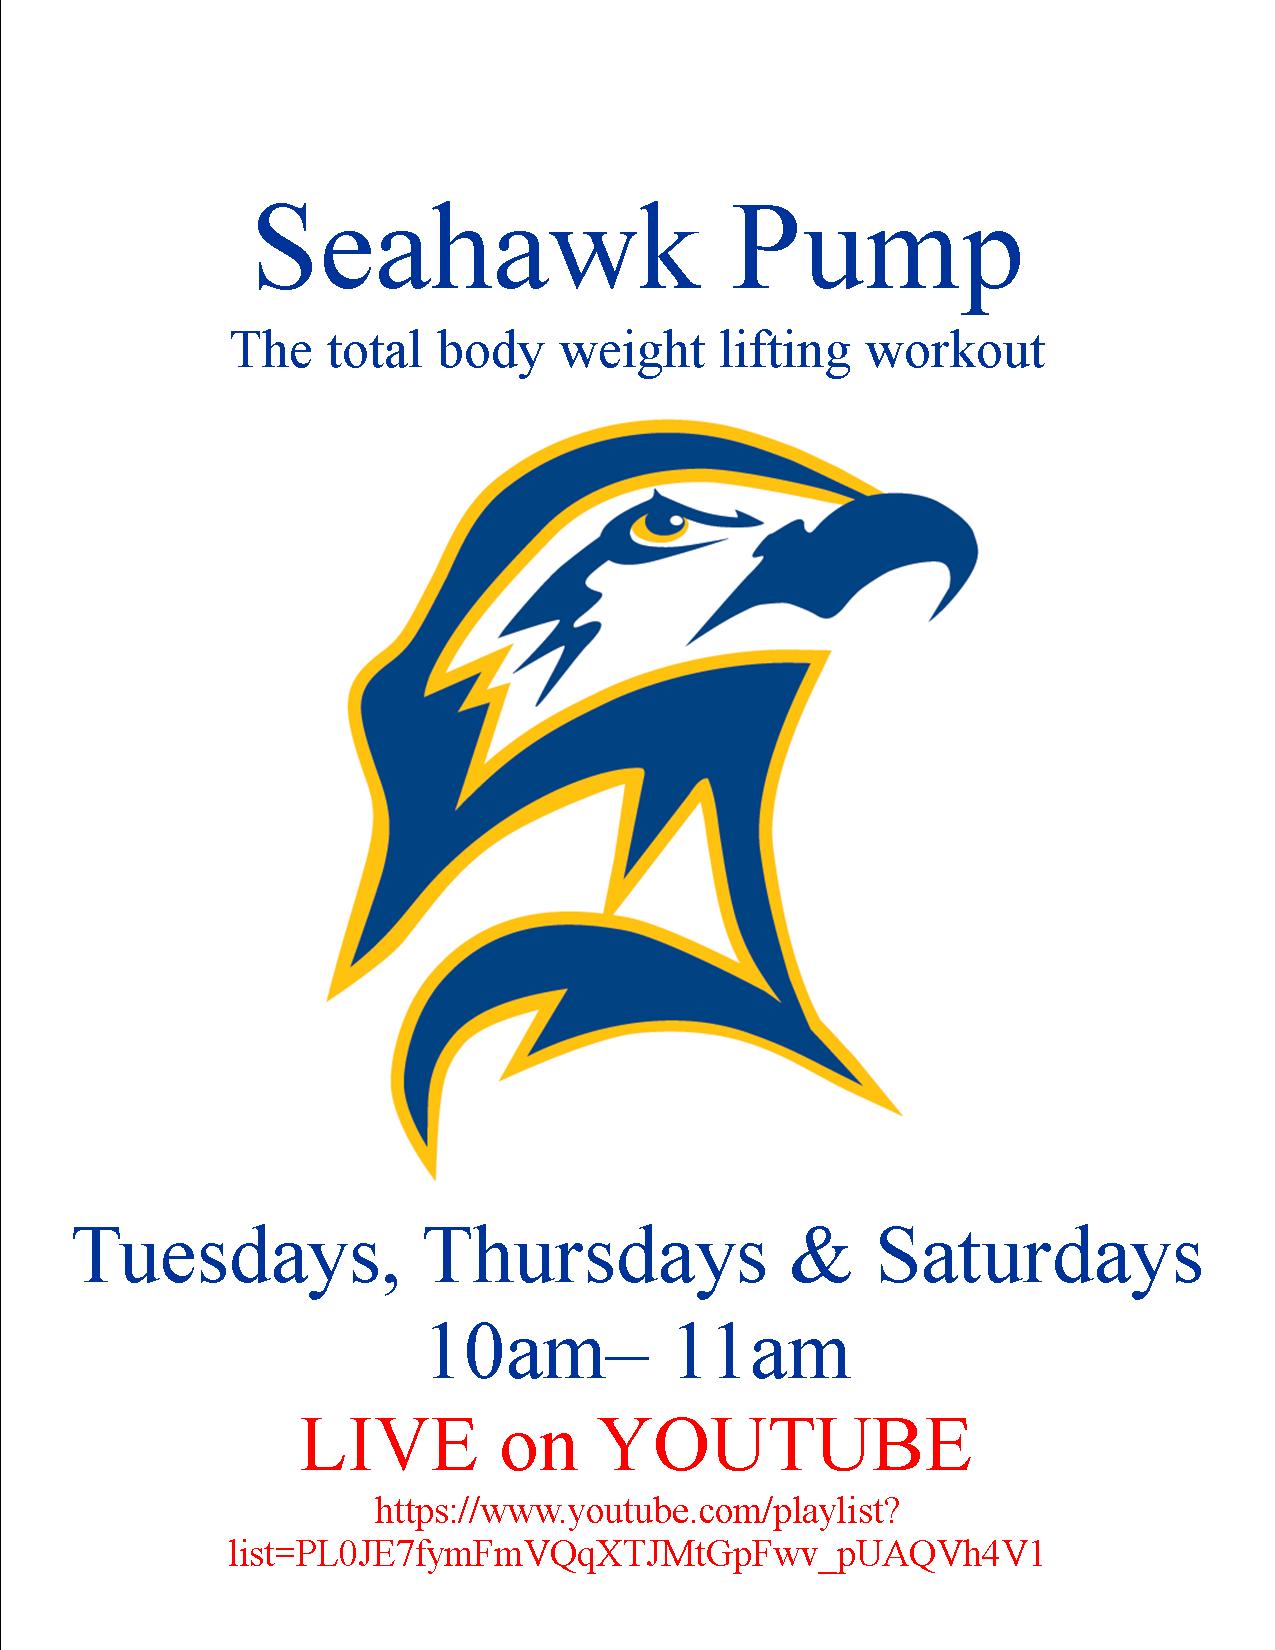 SeaHawk Pump continuing LIVE on YOUTUBE